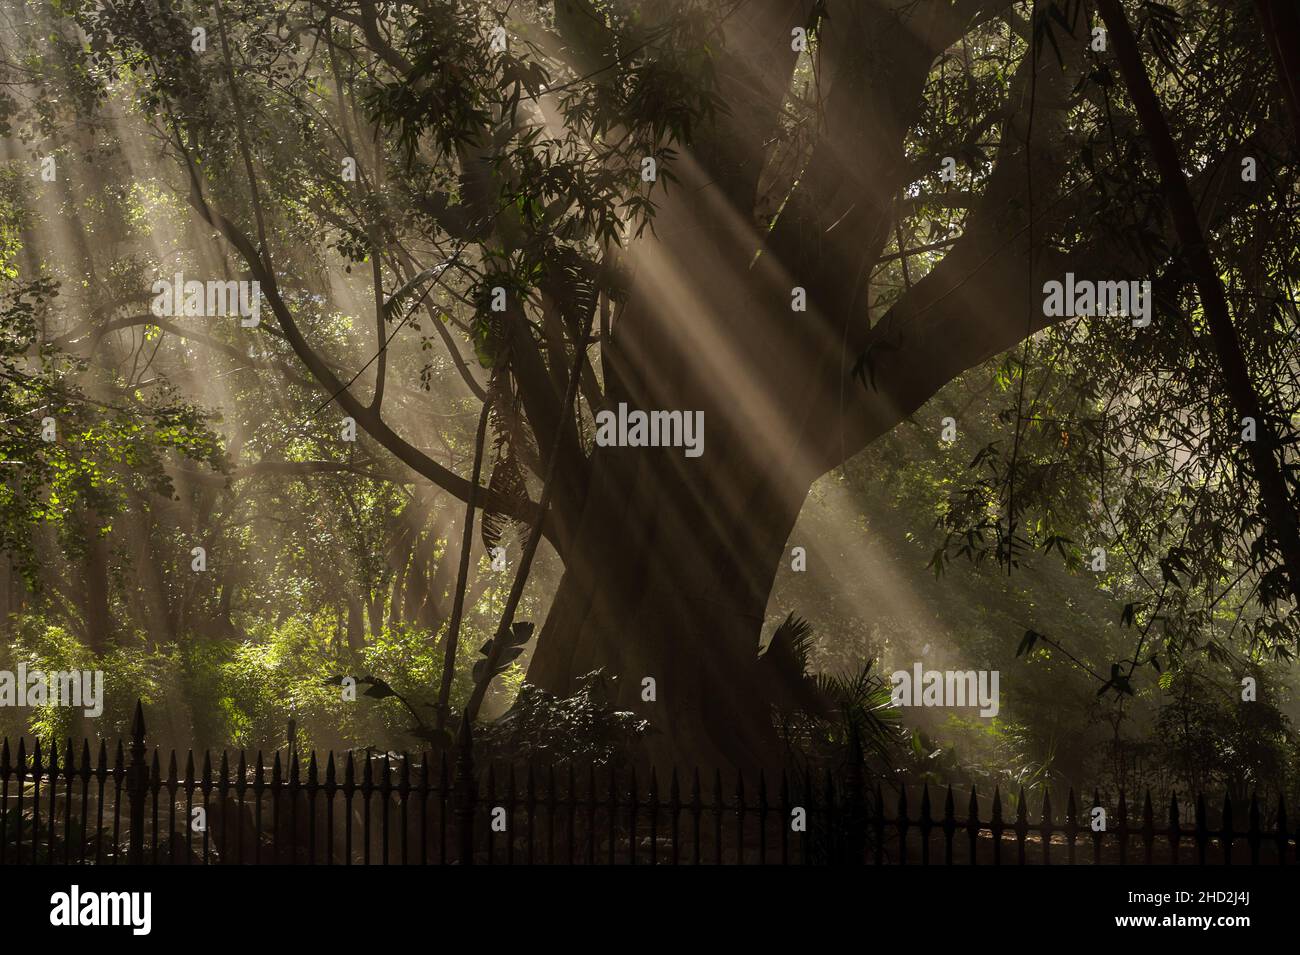 Smoke filters through Company Gardens arboretum, adjacent to South Africa's Parliament damaged by fire in Cape Town on 2 January 2022 Stock Photo